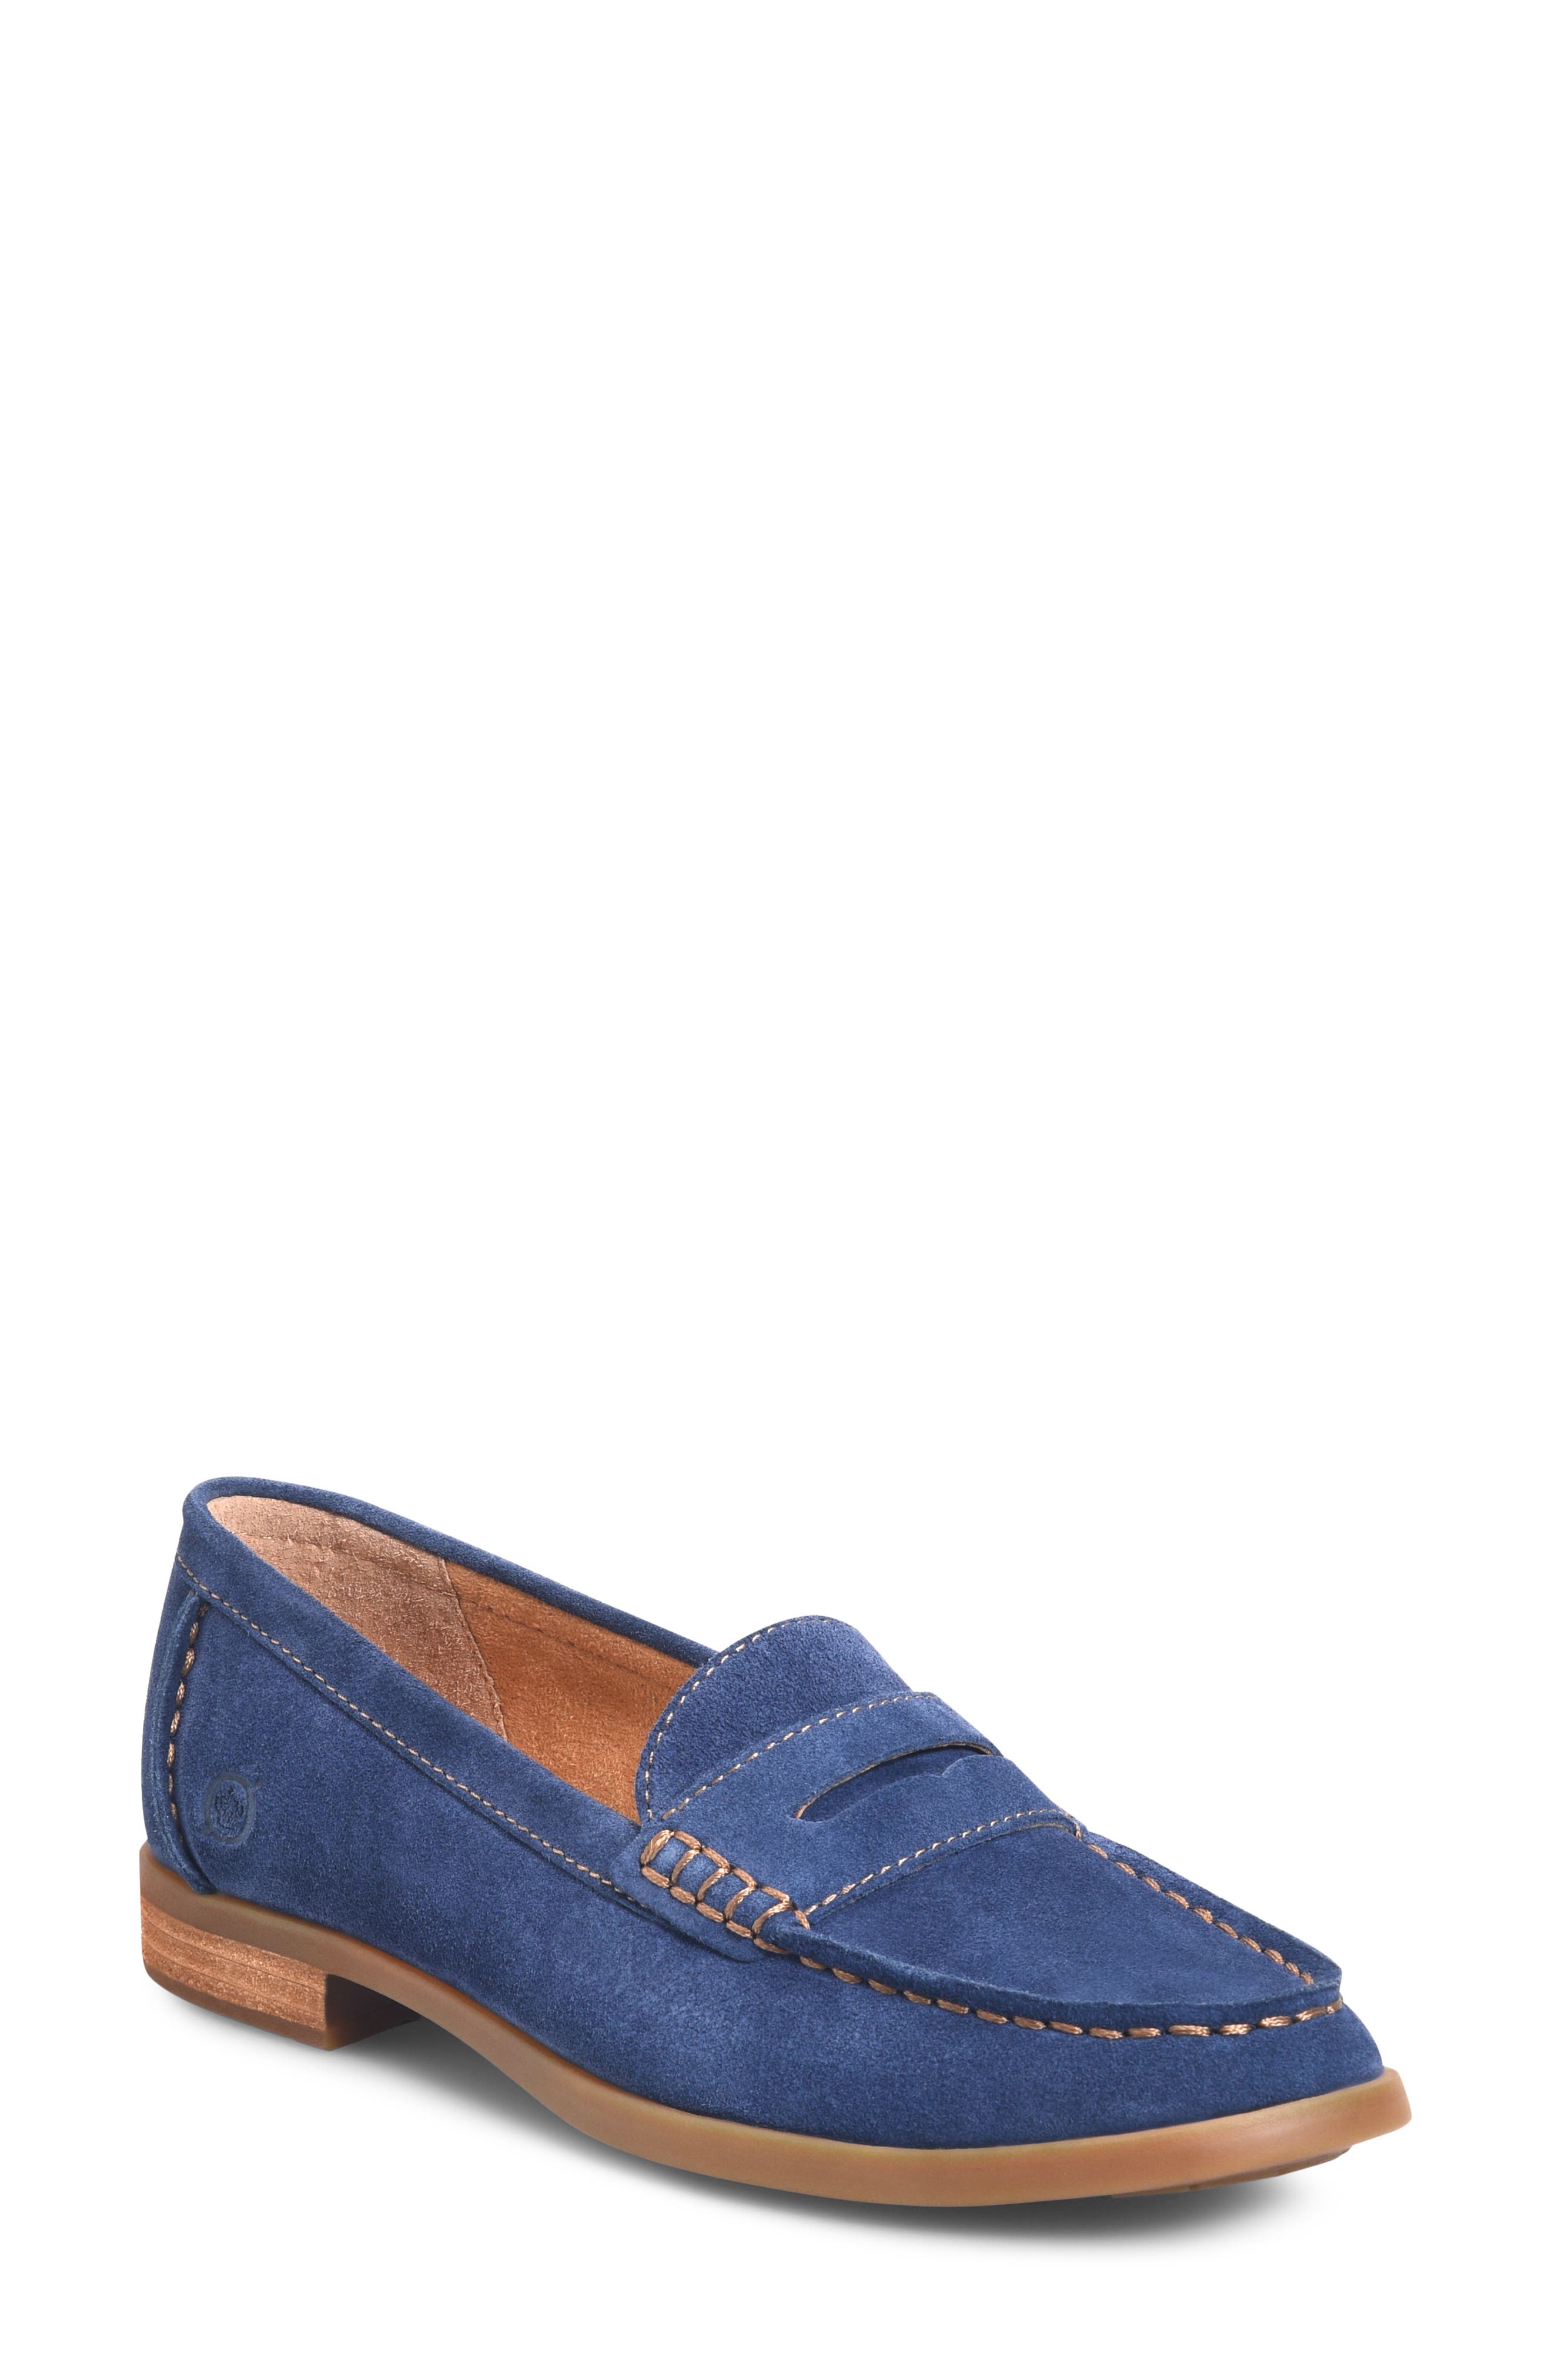 womens navy blue oxfords